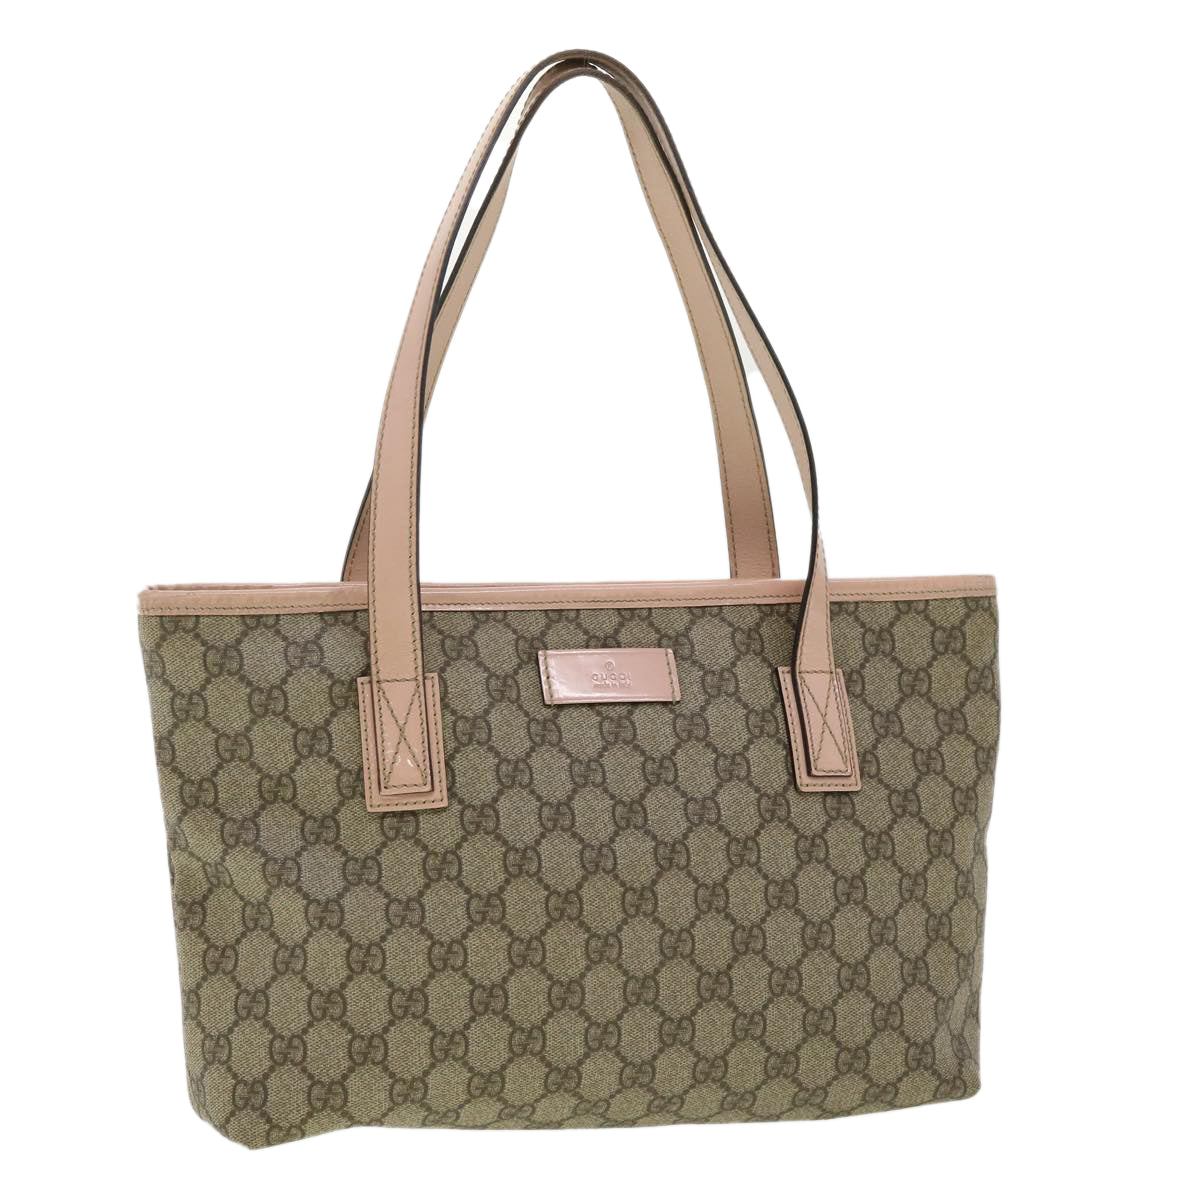 GUCCI GG Canvas Tote Bag PVC Leather Beige Auth ro554